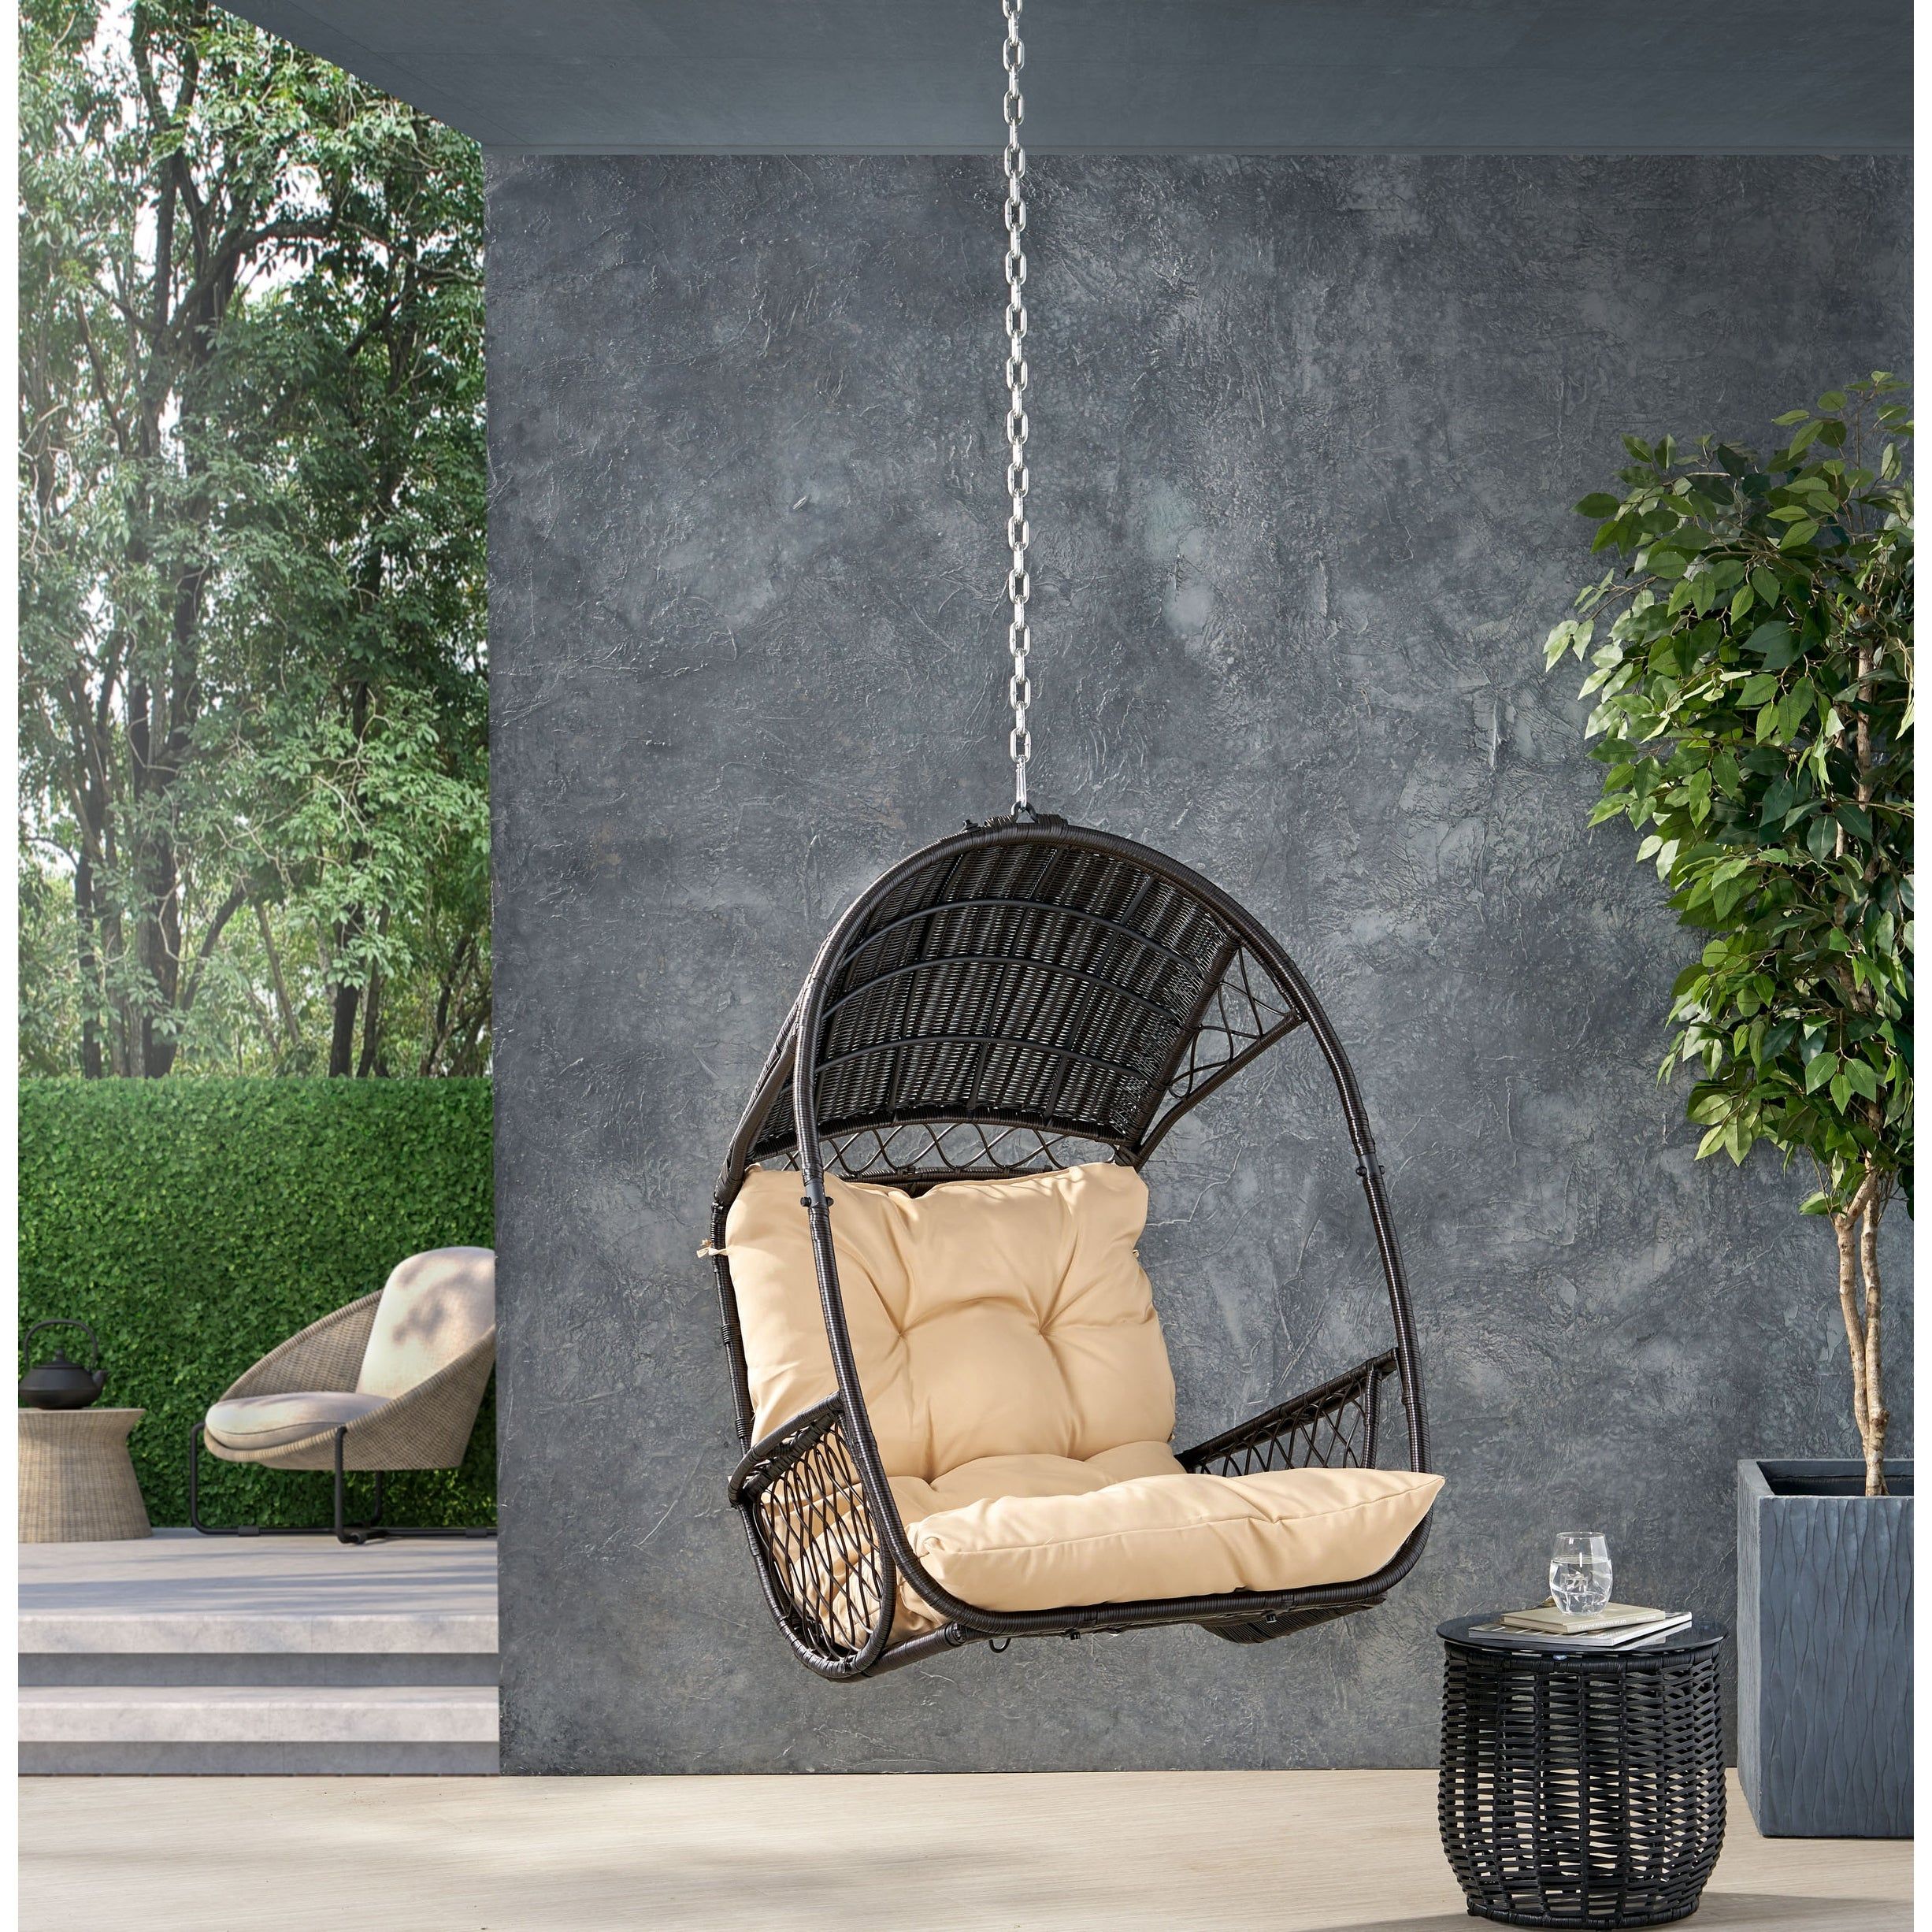 Greystone Outdoor/indoor Wicker Hanging Chair W/8 Foot Chainchristopher  Knight Home – On Sale – Overstock – 31825459 Pertaining To Greystone Plant Stands (View 14 of 15)